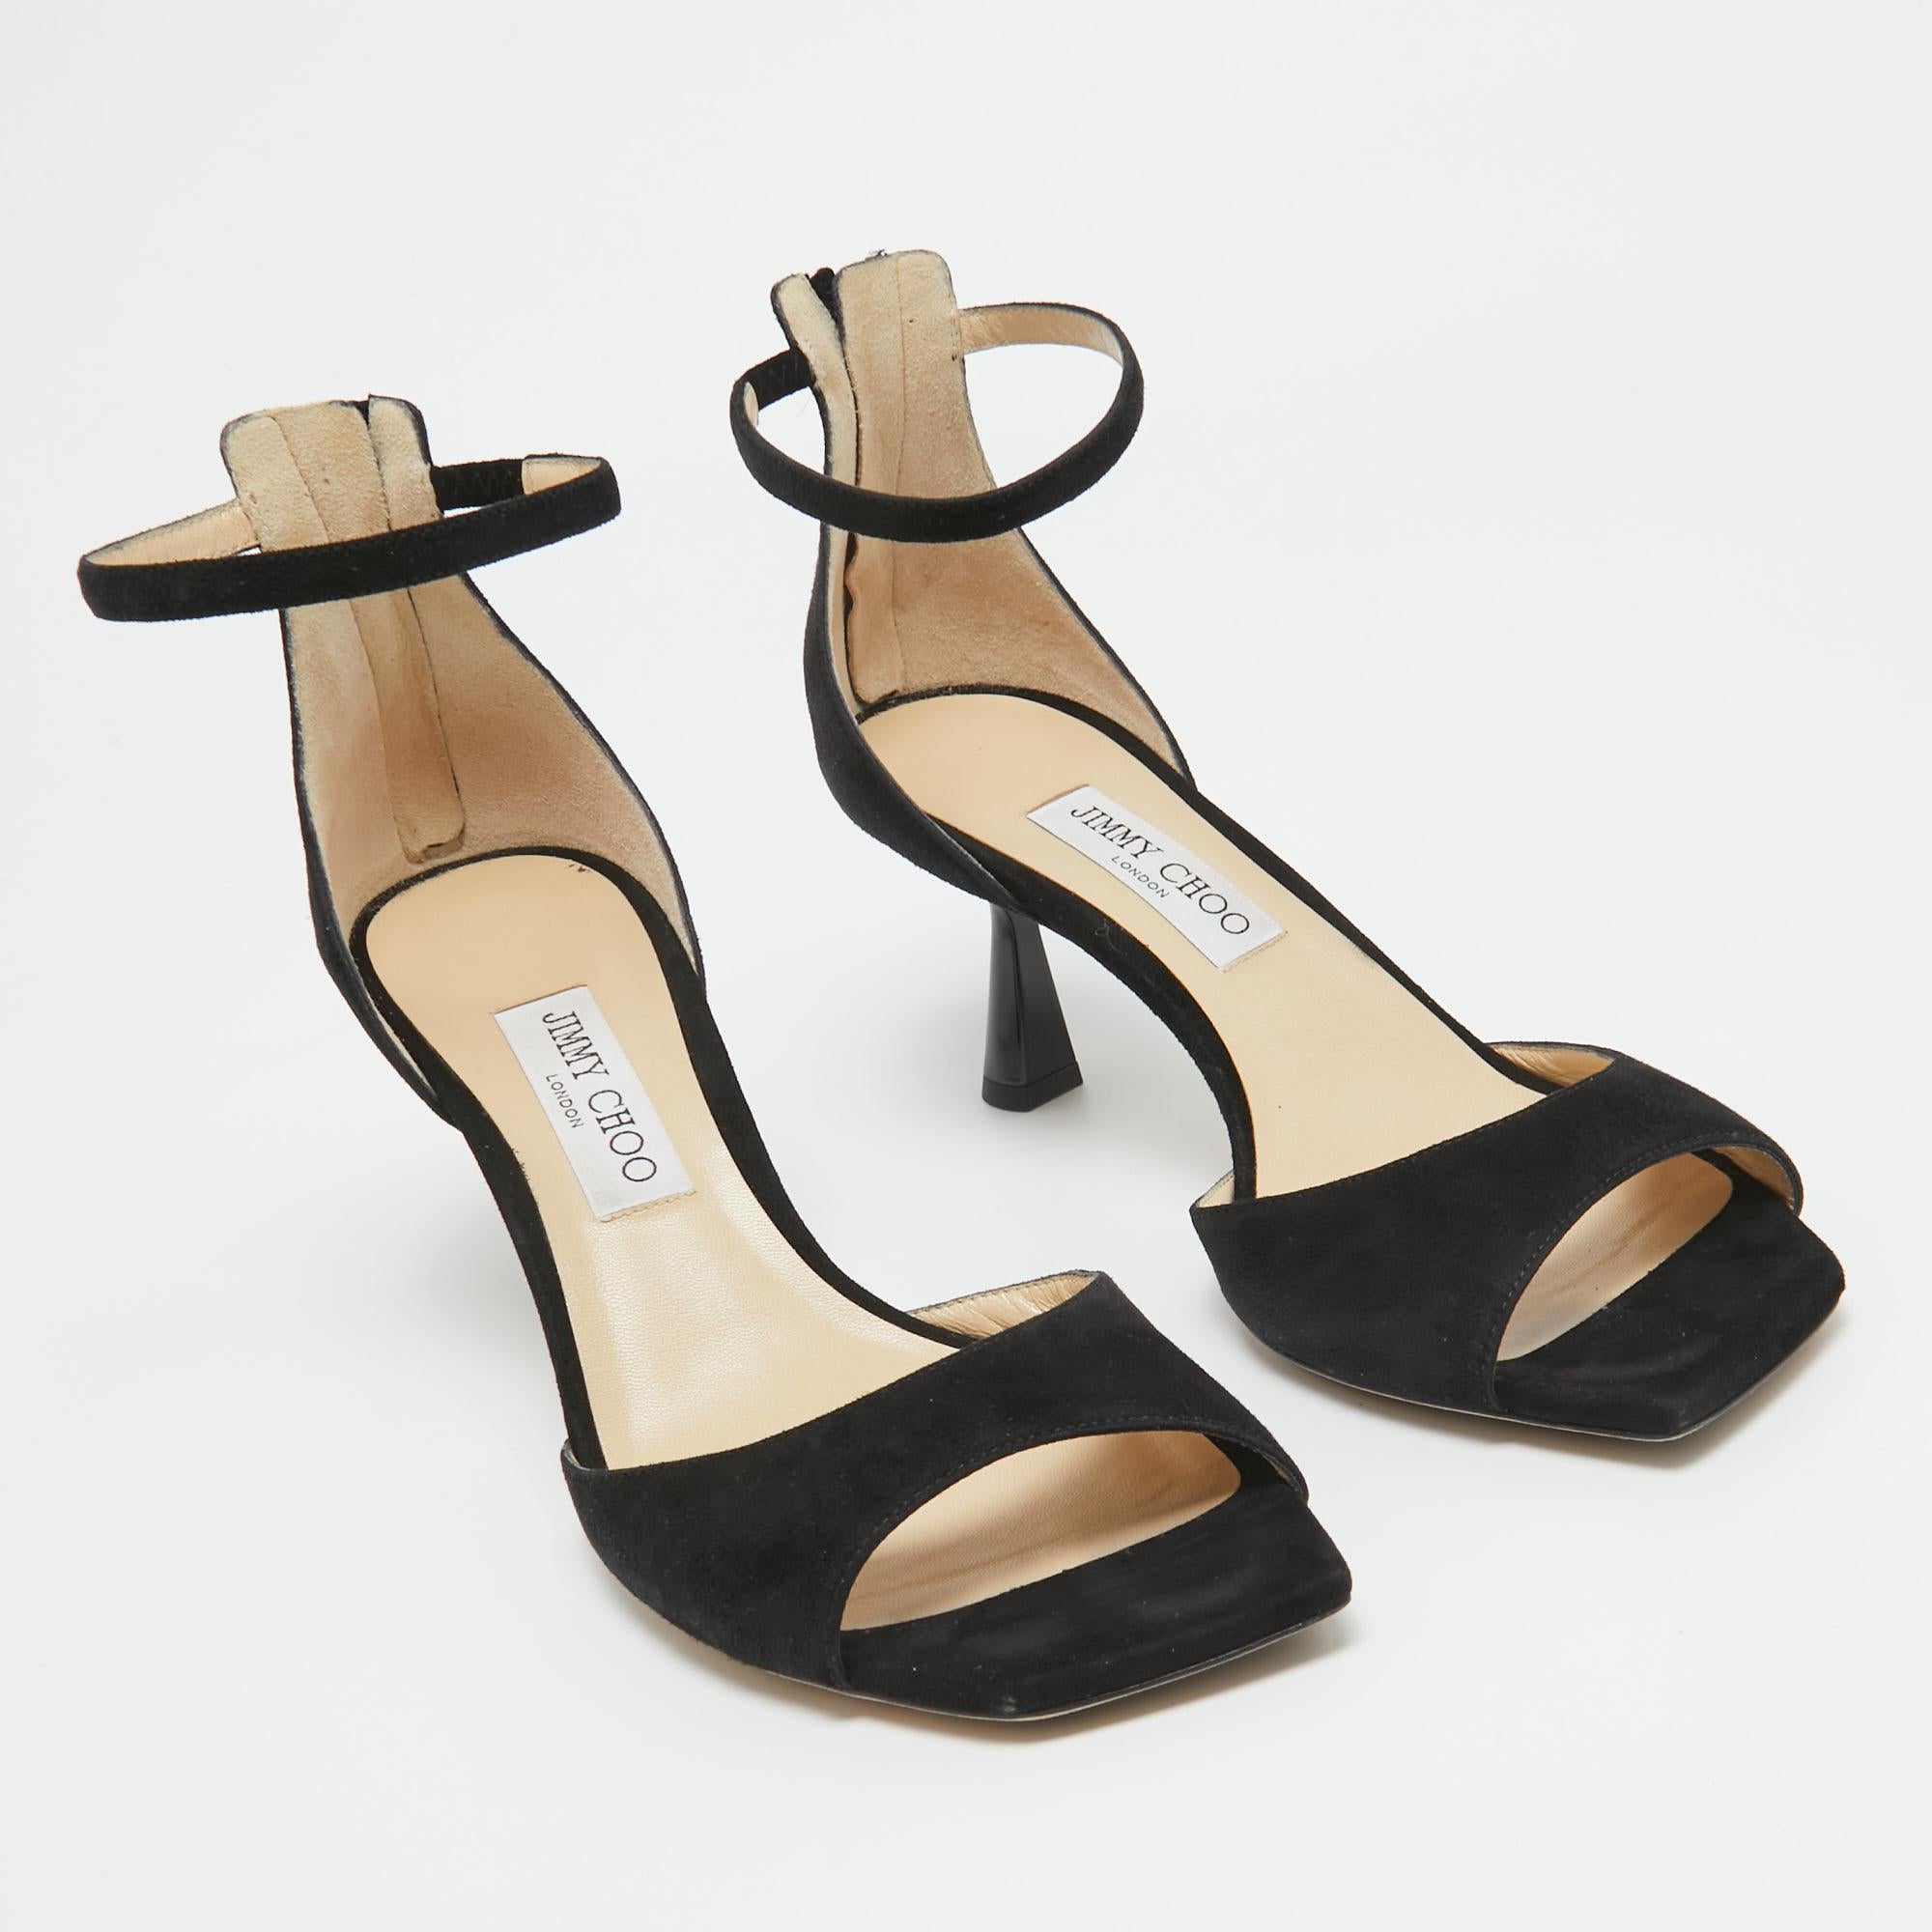 Jimmy Choo Black Suede Reon Sandals Size 41 1